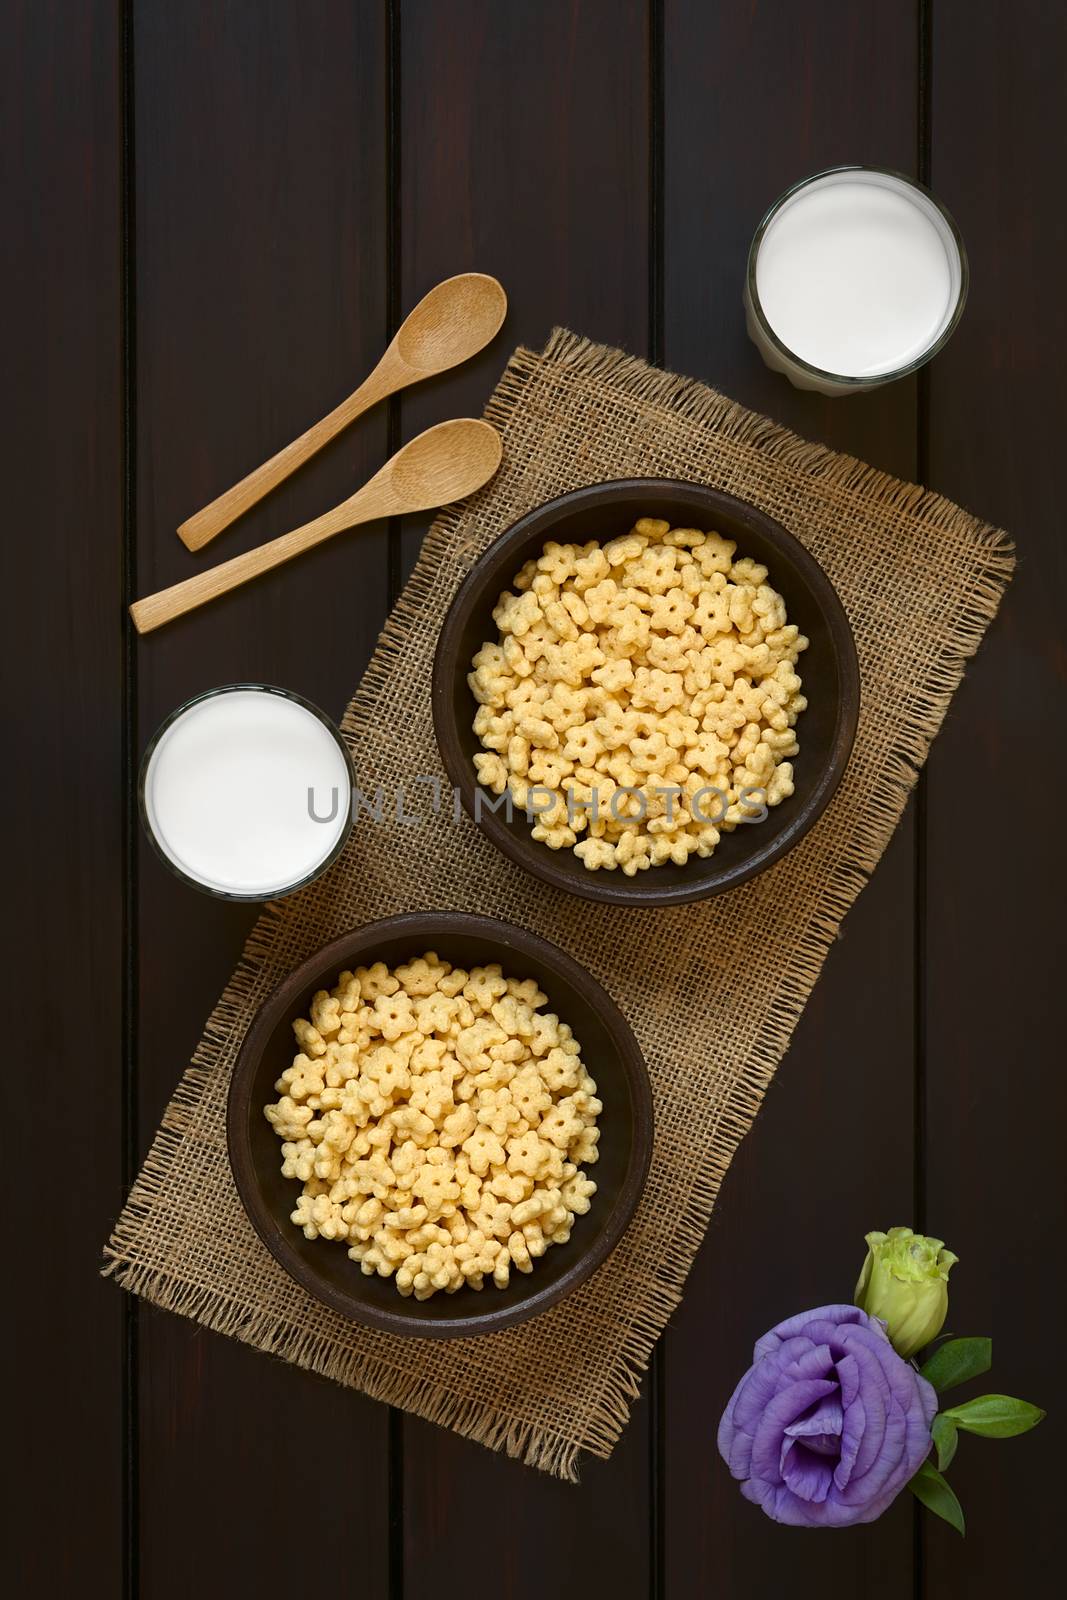 Honey flavored breakfast cereal in two rustic bowls with glasses of milk and wooden spoons on the side, photographed overhead on dark wood with natural light